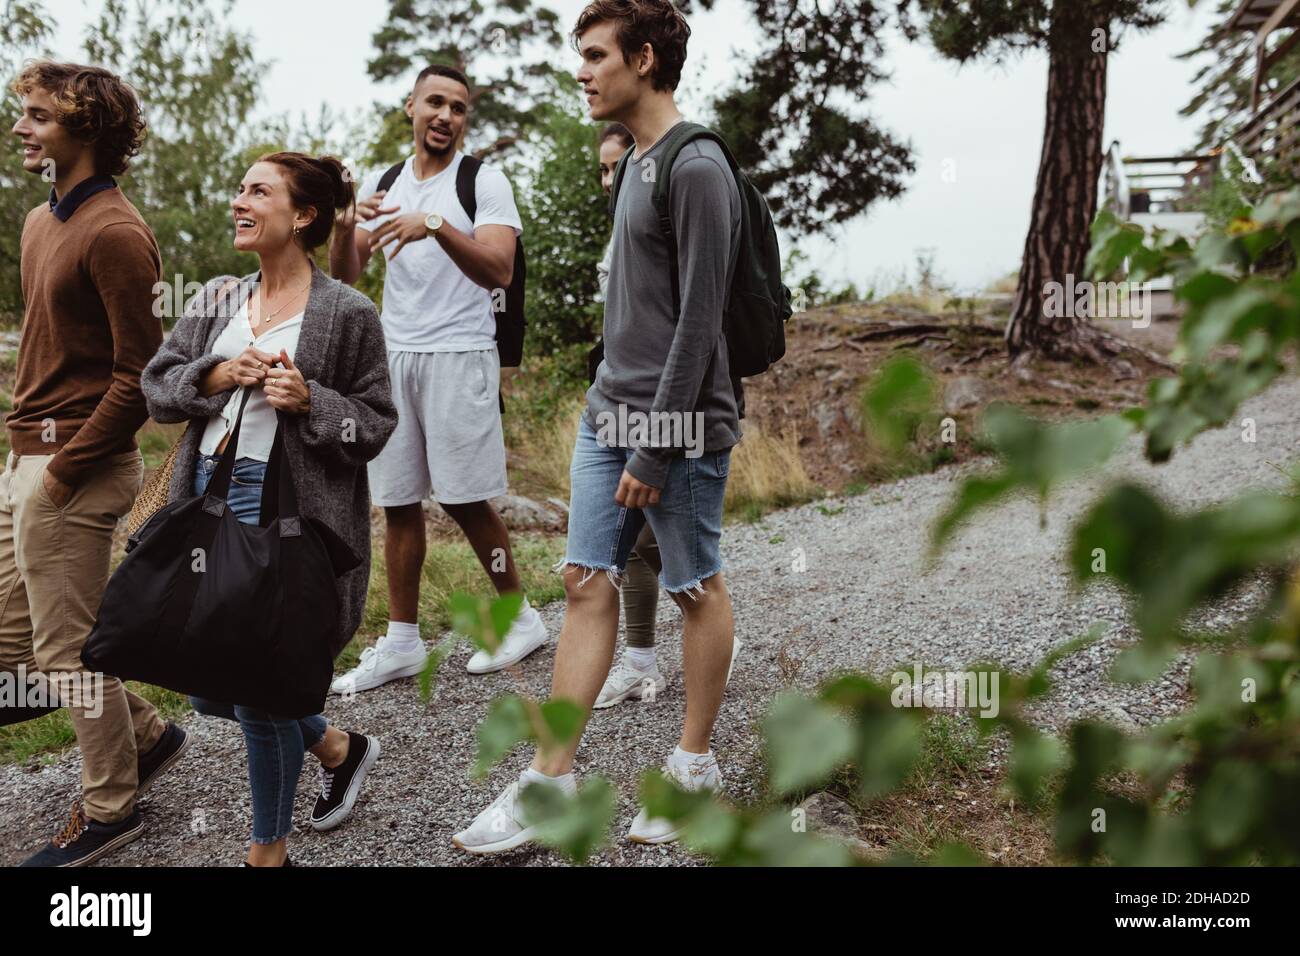 Smiling friends and family walking on footpath amidst trees during vacation Stock Photo